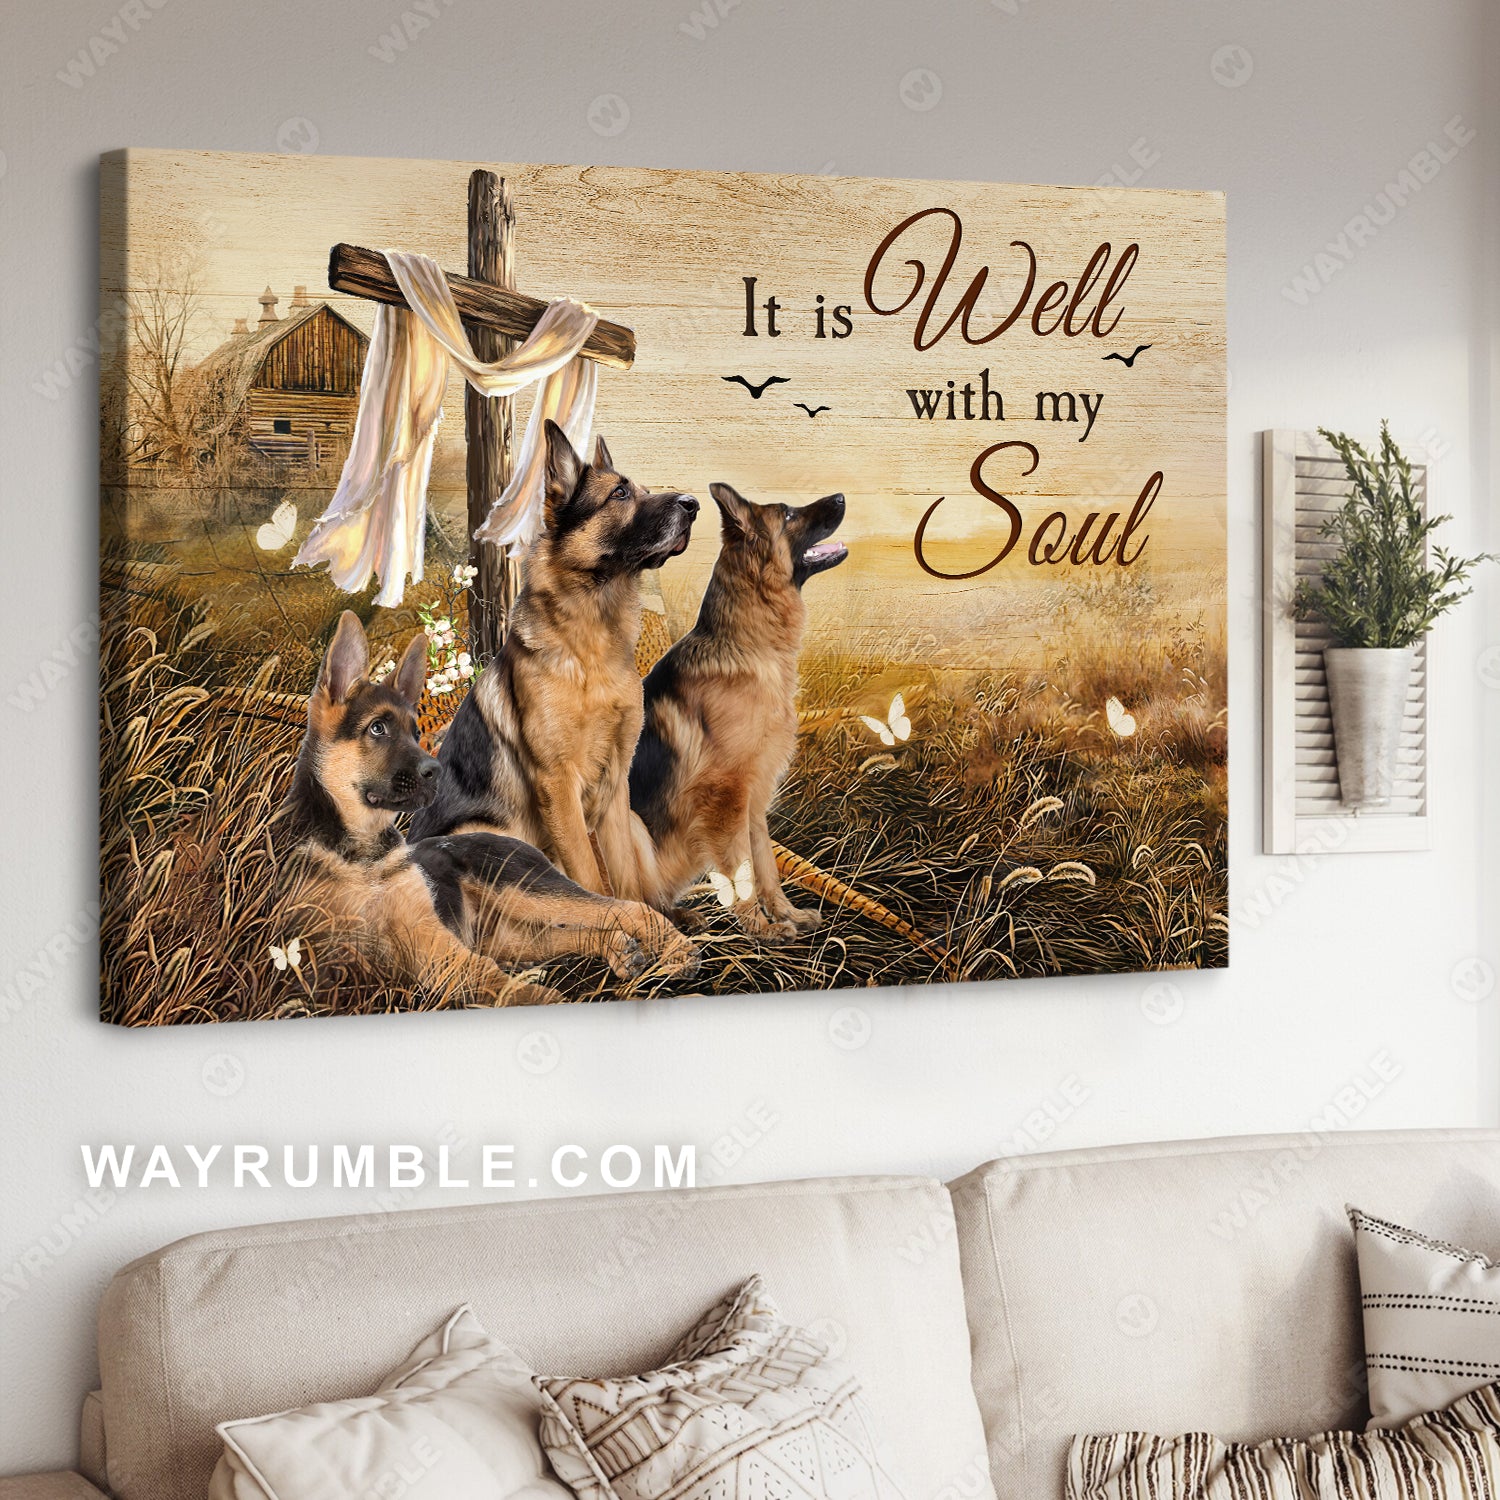 German Shepherd, The three brother, The rugged crosses, Countryside landscape, It is well with my soul - Jesus Landscape Canvas Prints, Christian Wall Art